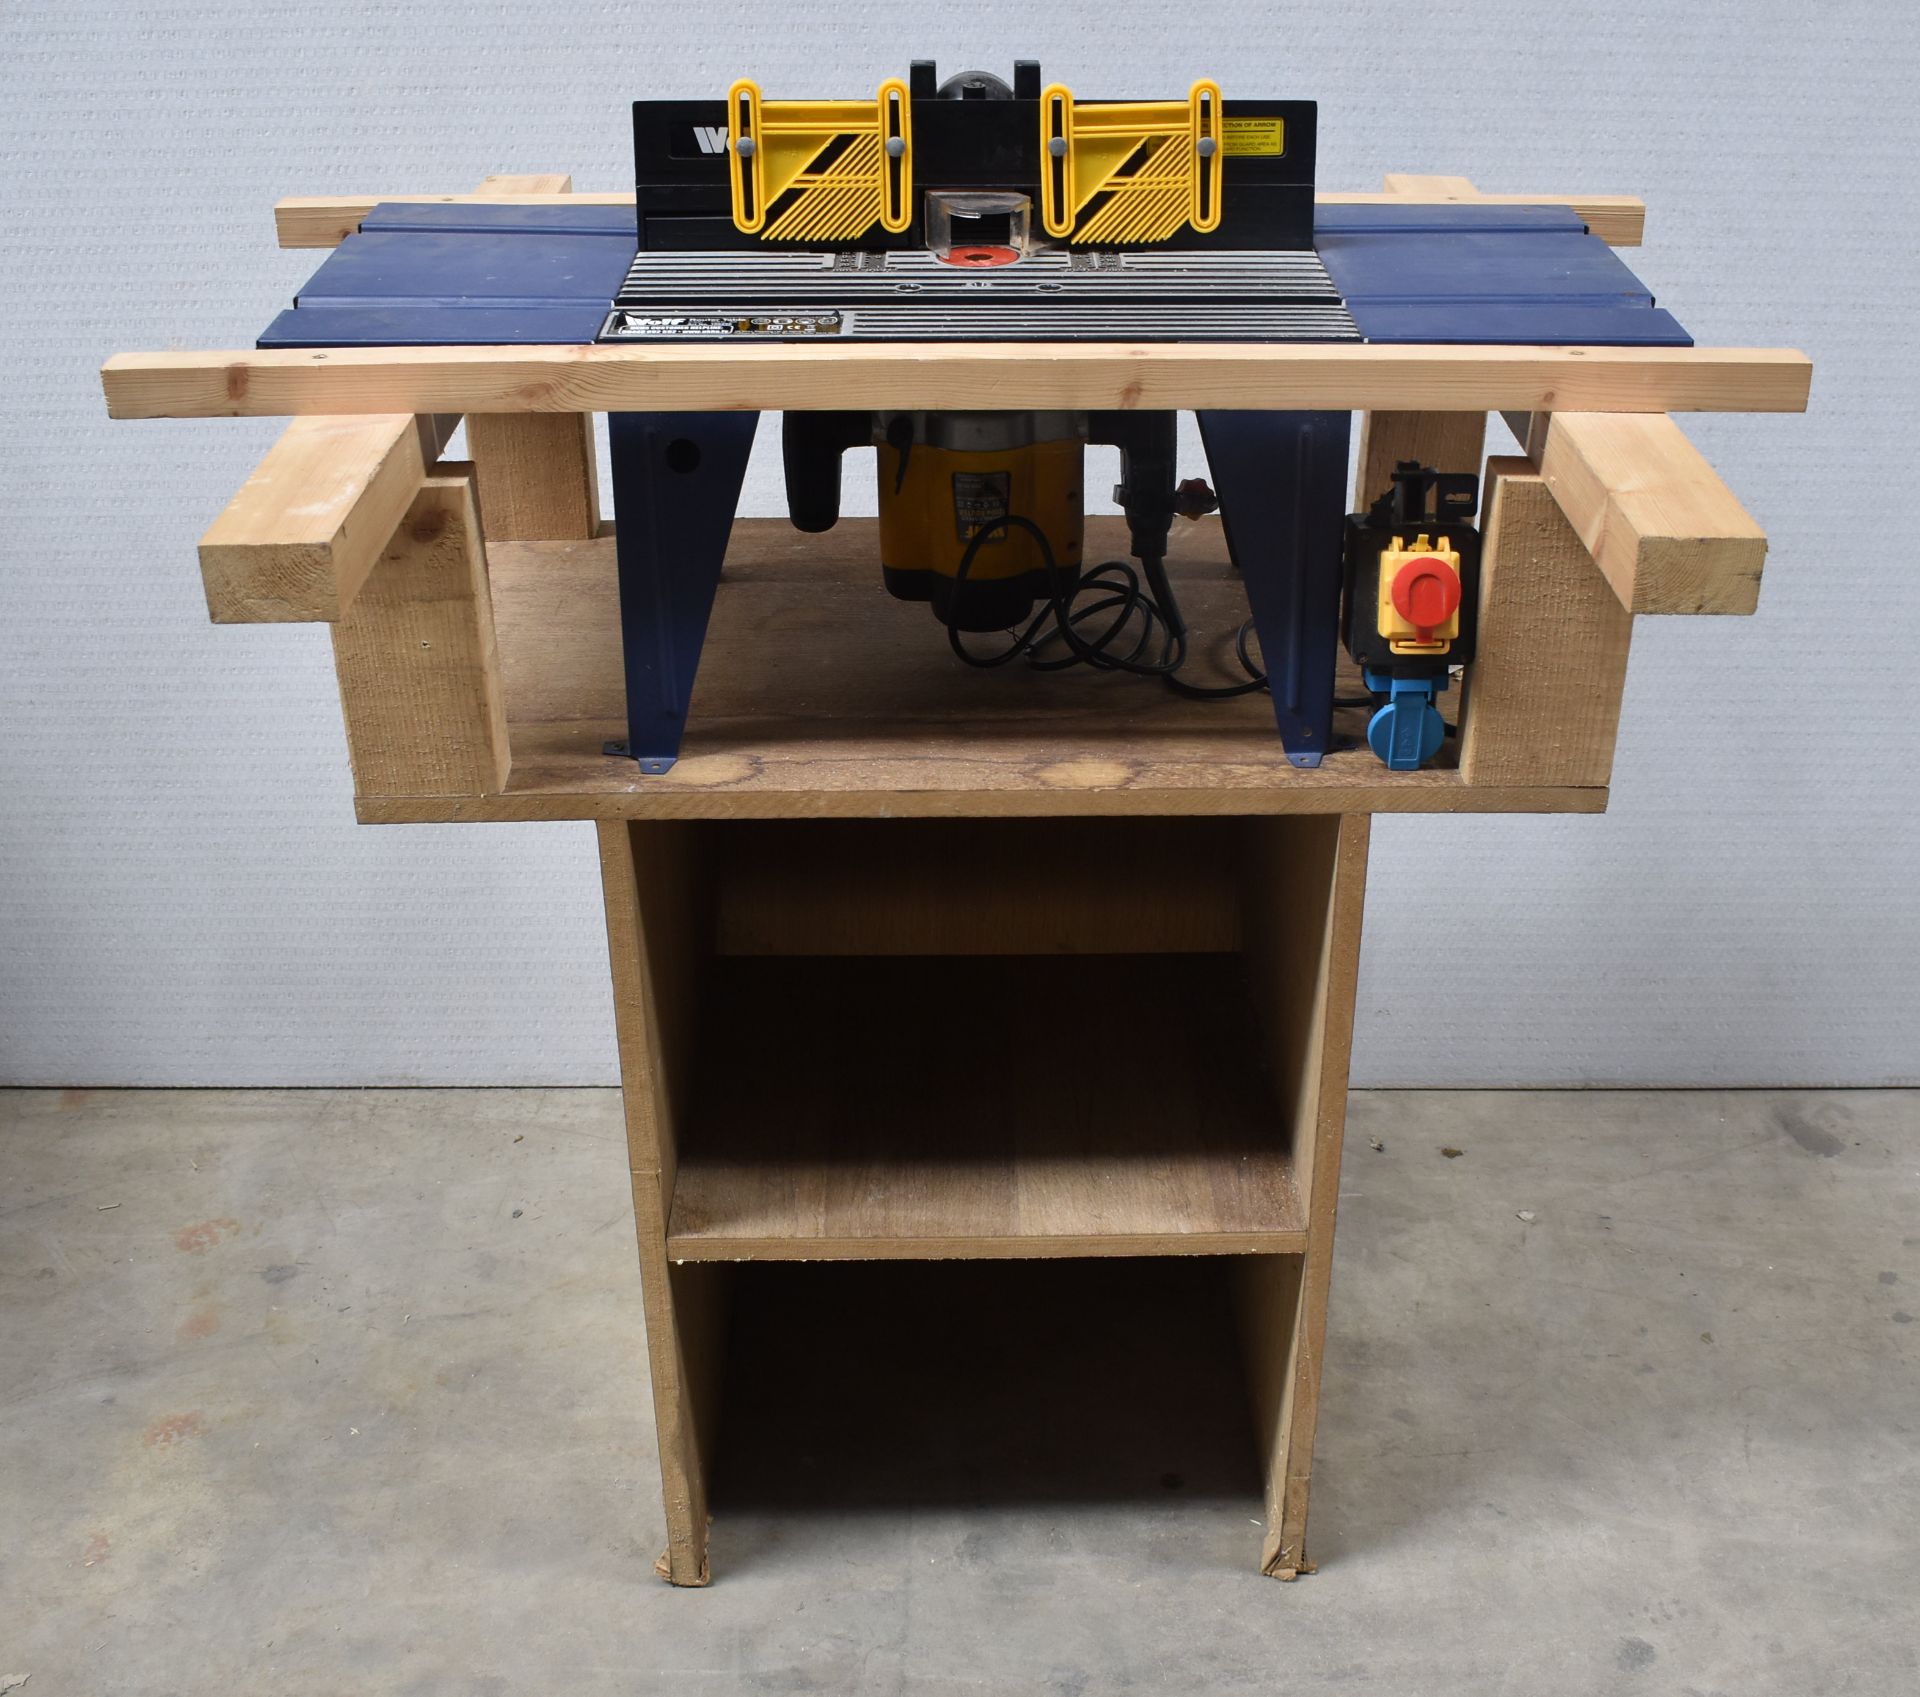 Wolf Router Table and 1200W Wolf Router on Handmade Wooden Workbench - 100(w) x 82(d) x 99(h) cm - - Image 2 of 19